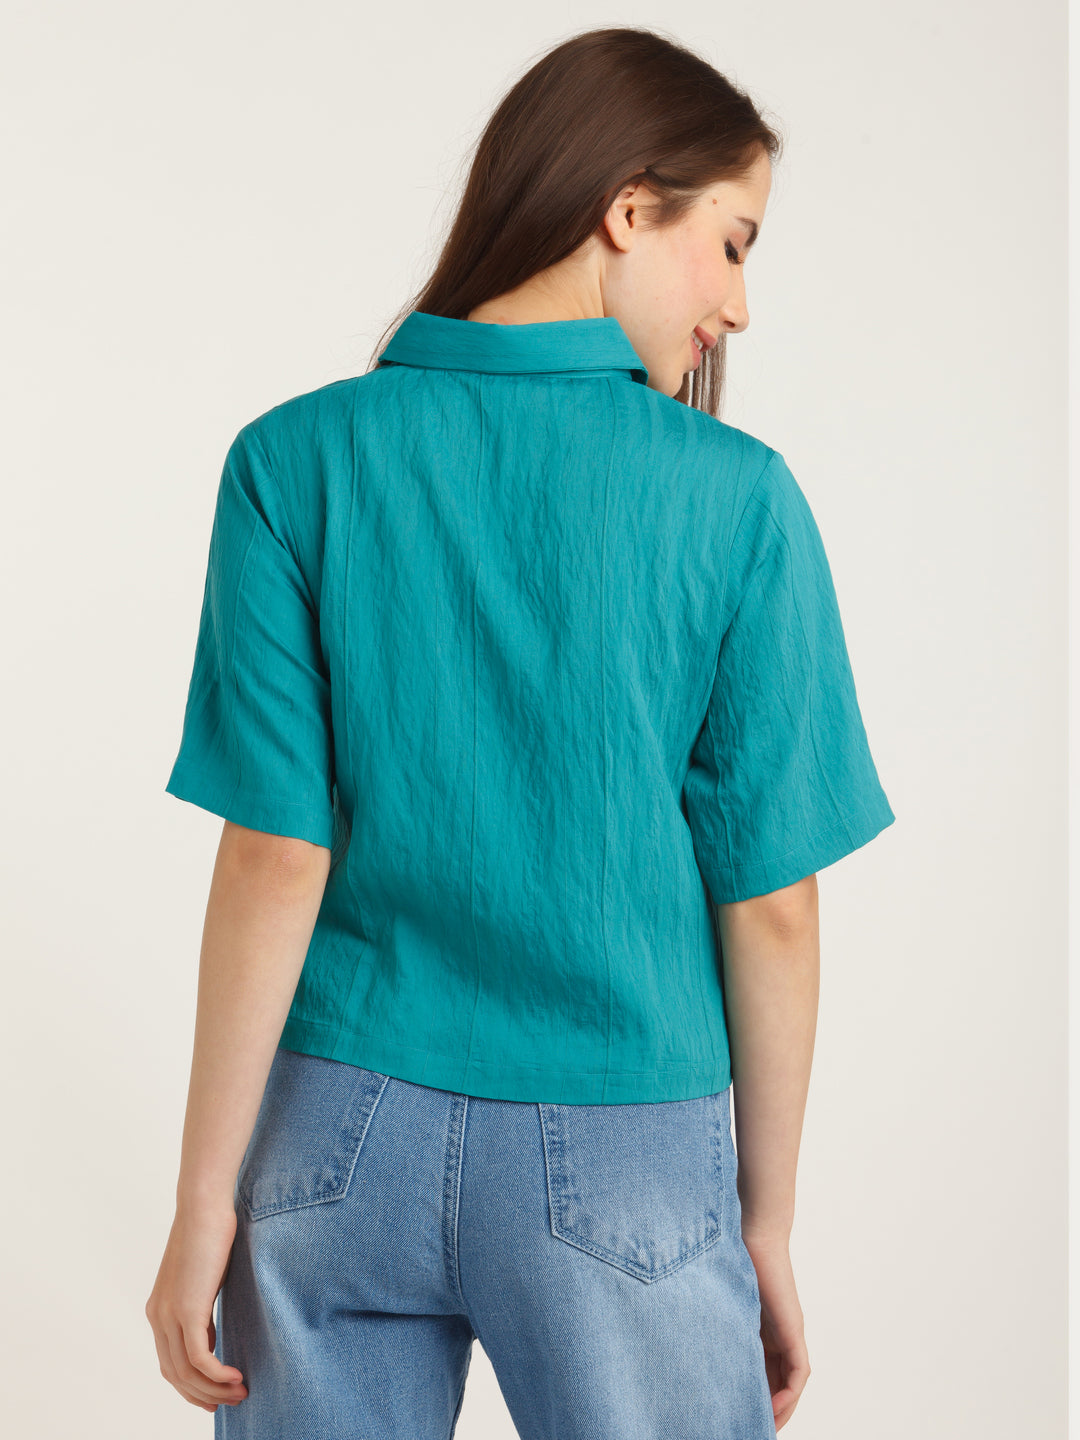 Teal Solid Shirt For Women